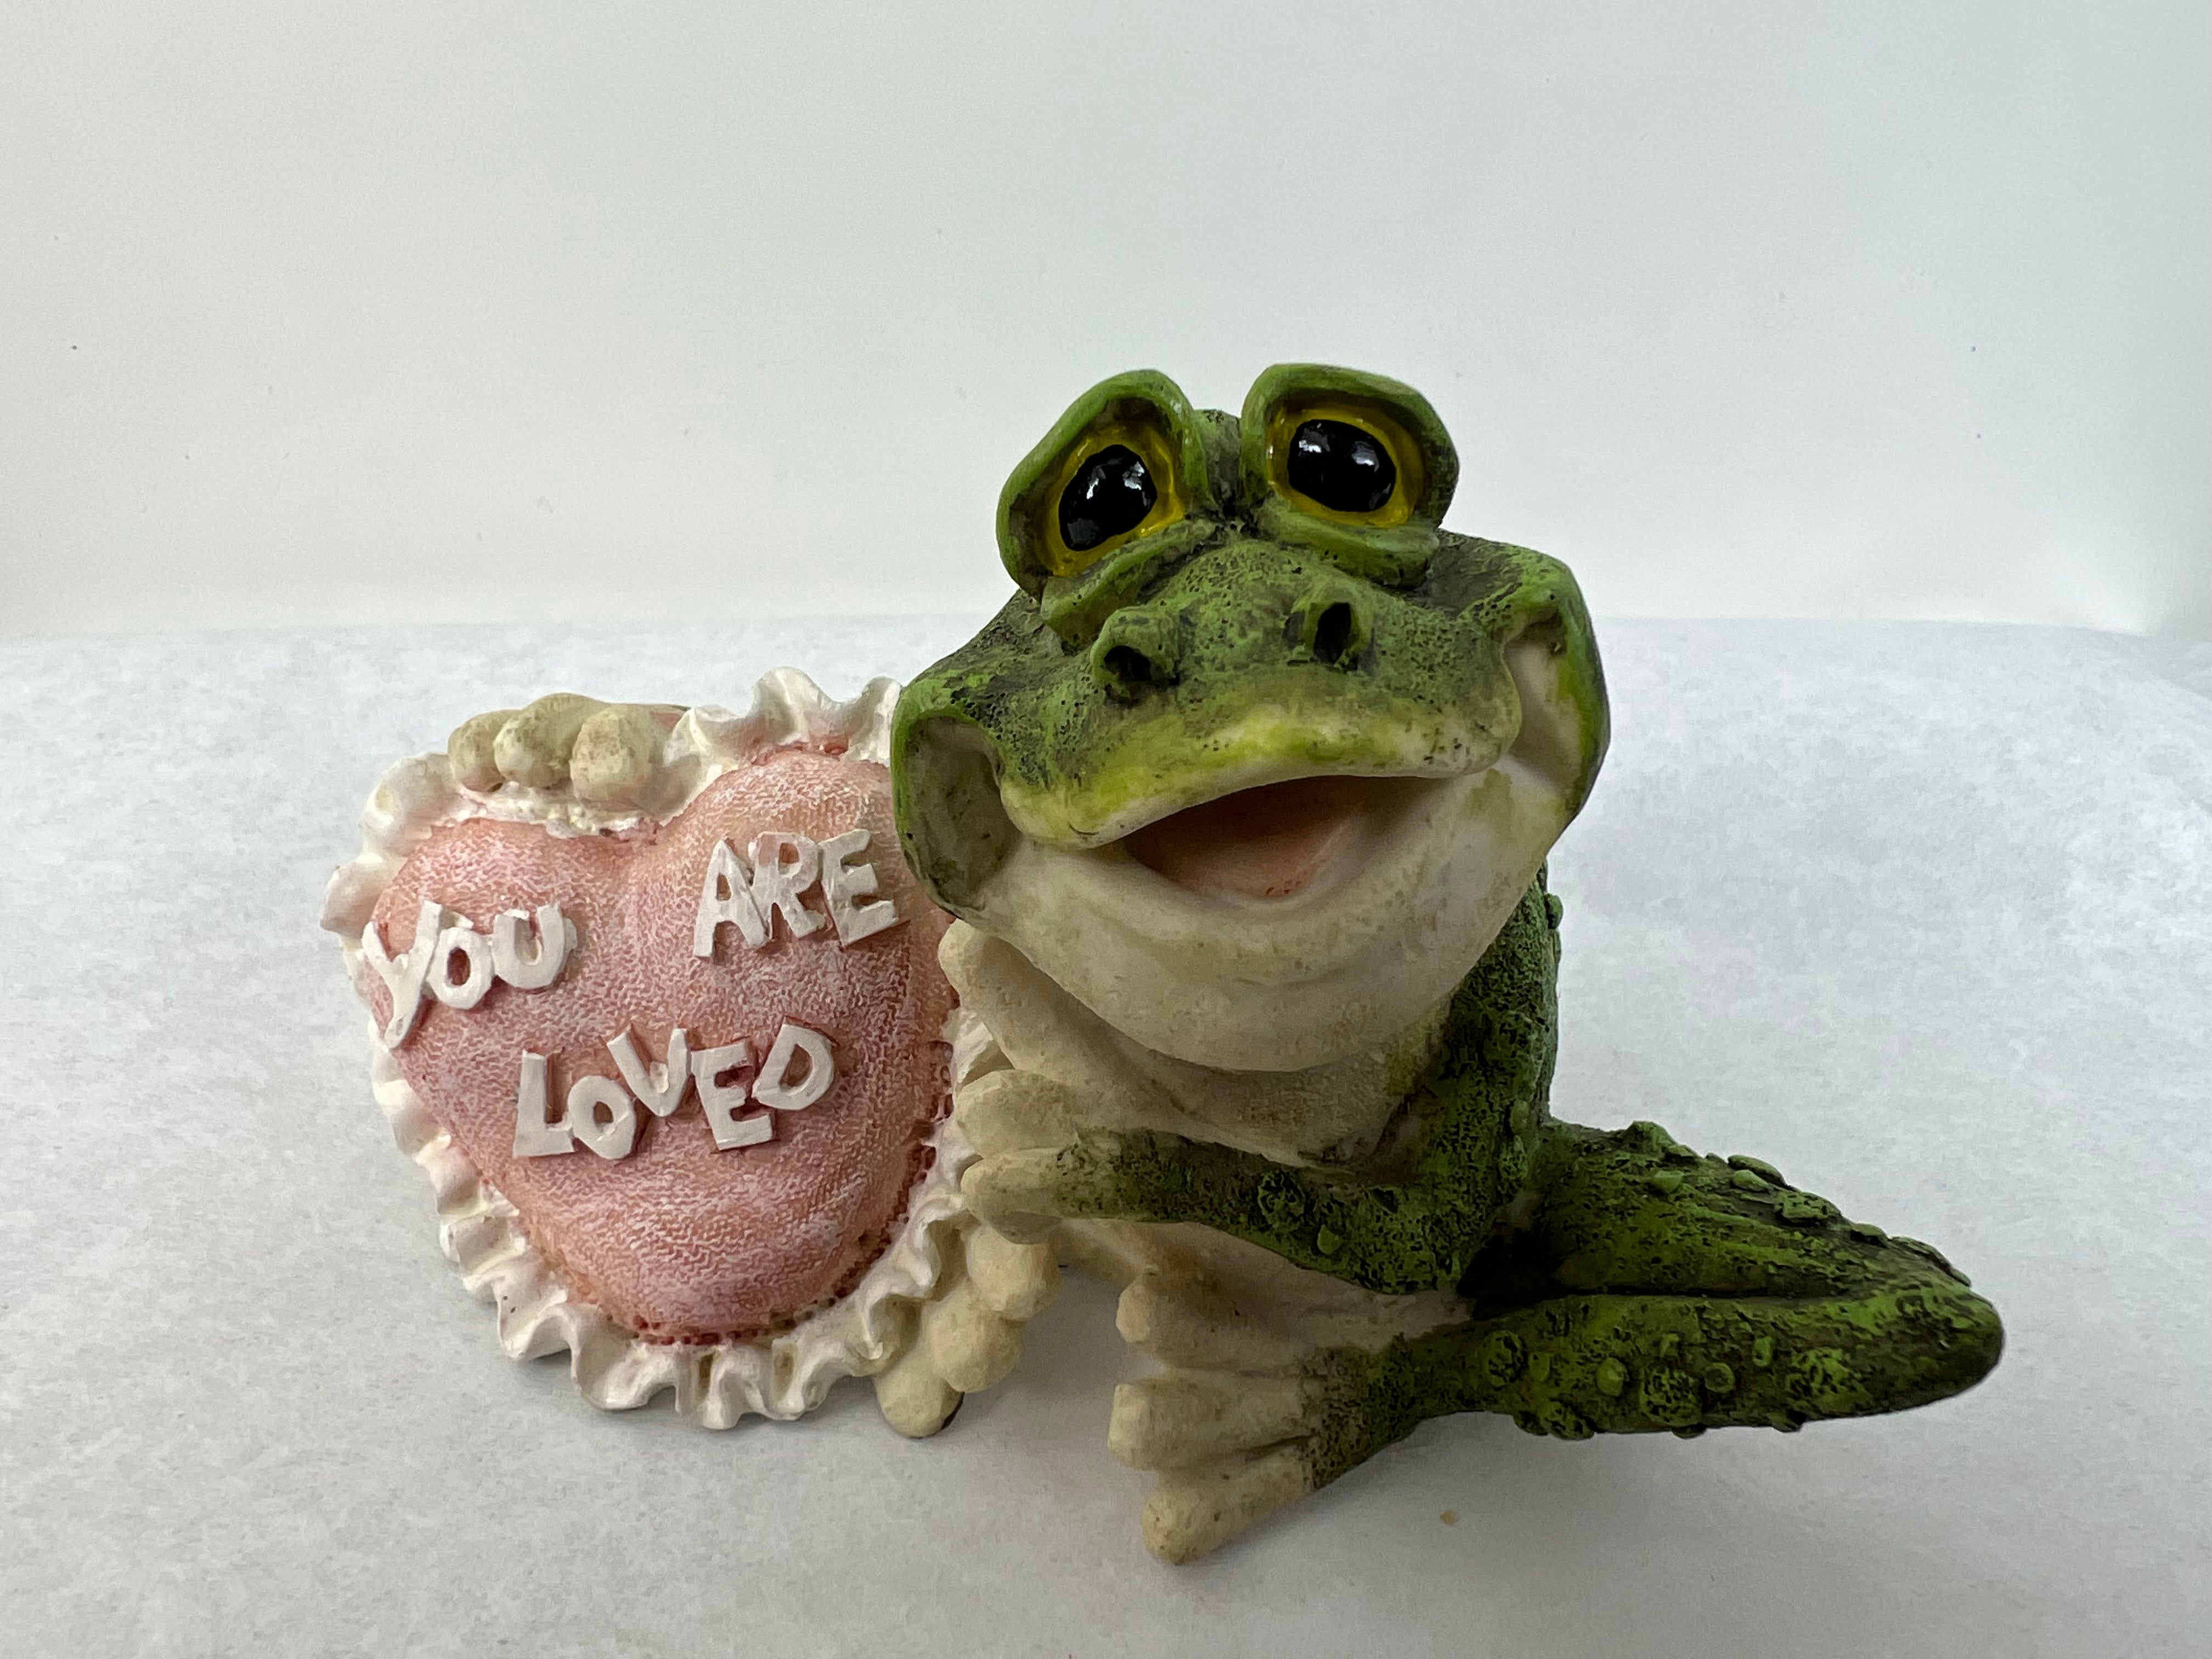 " You are loved " Message Frog with Golf Clubs